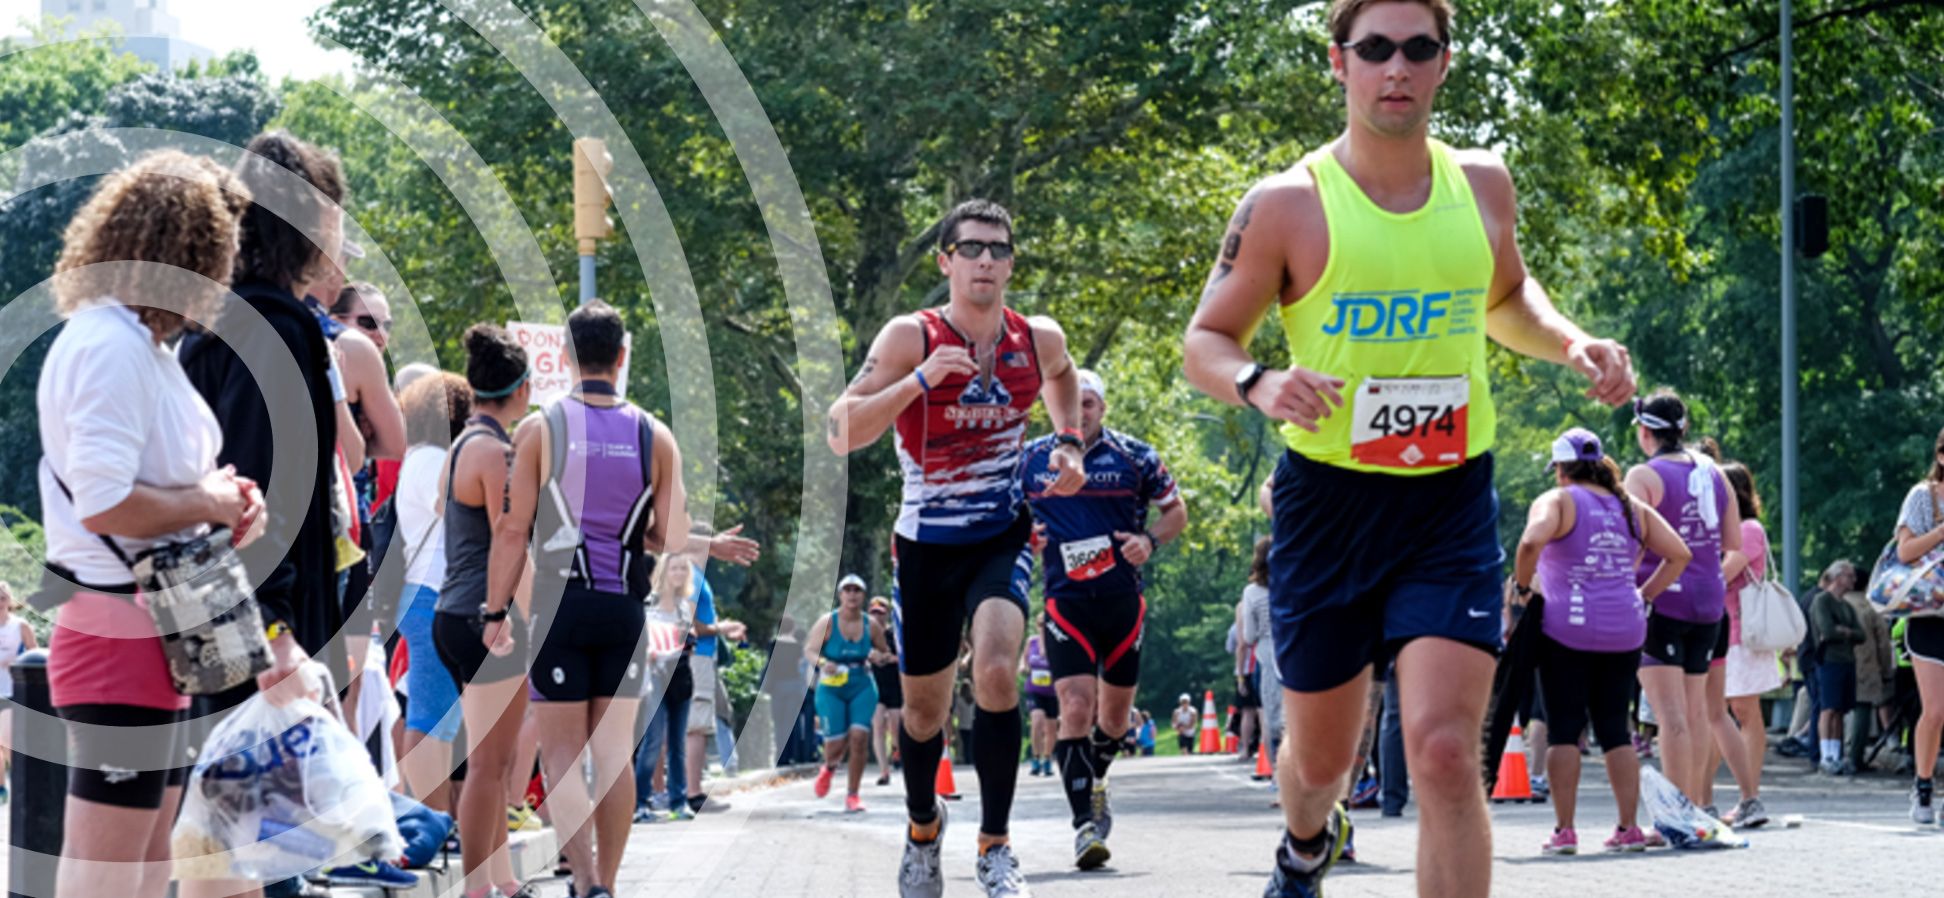 The 2017 New York City Triathlon Guide: Parking, Maps & More